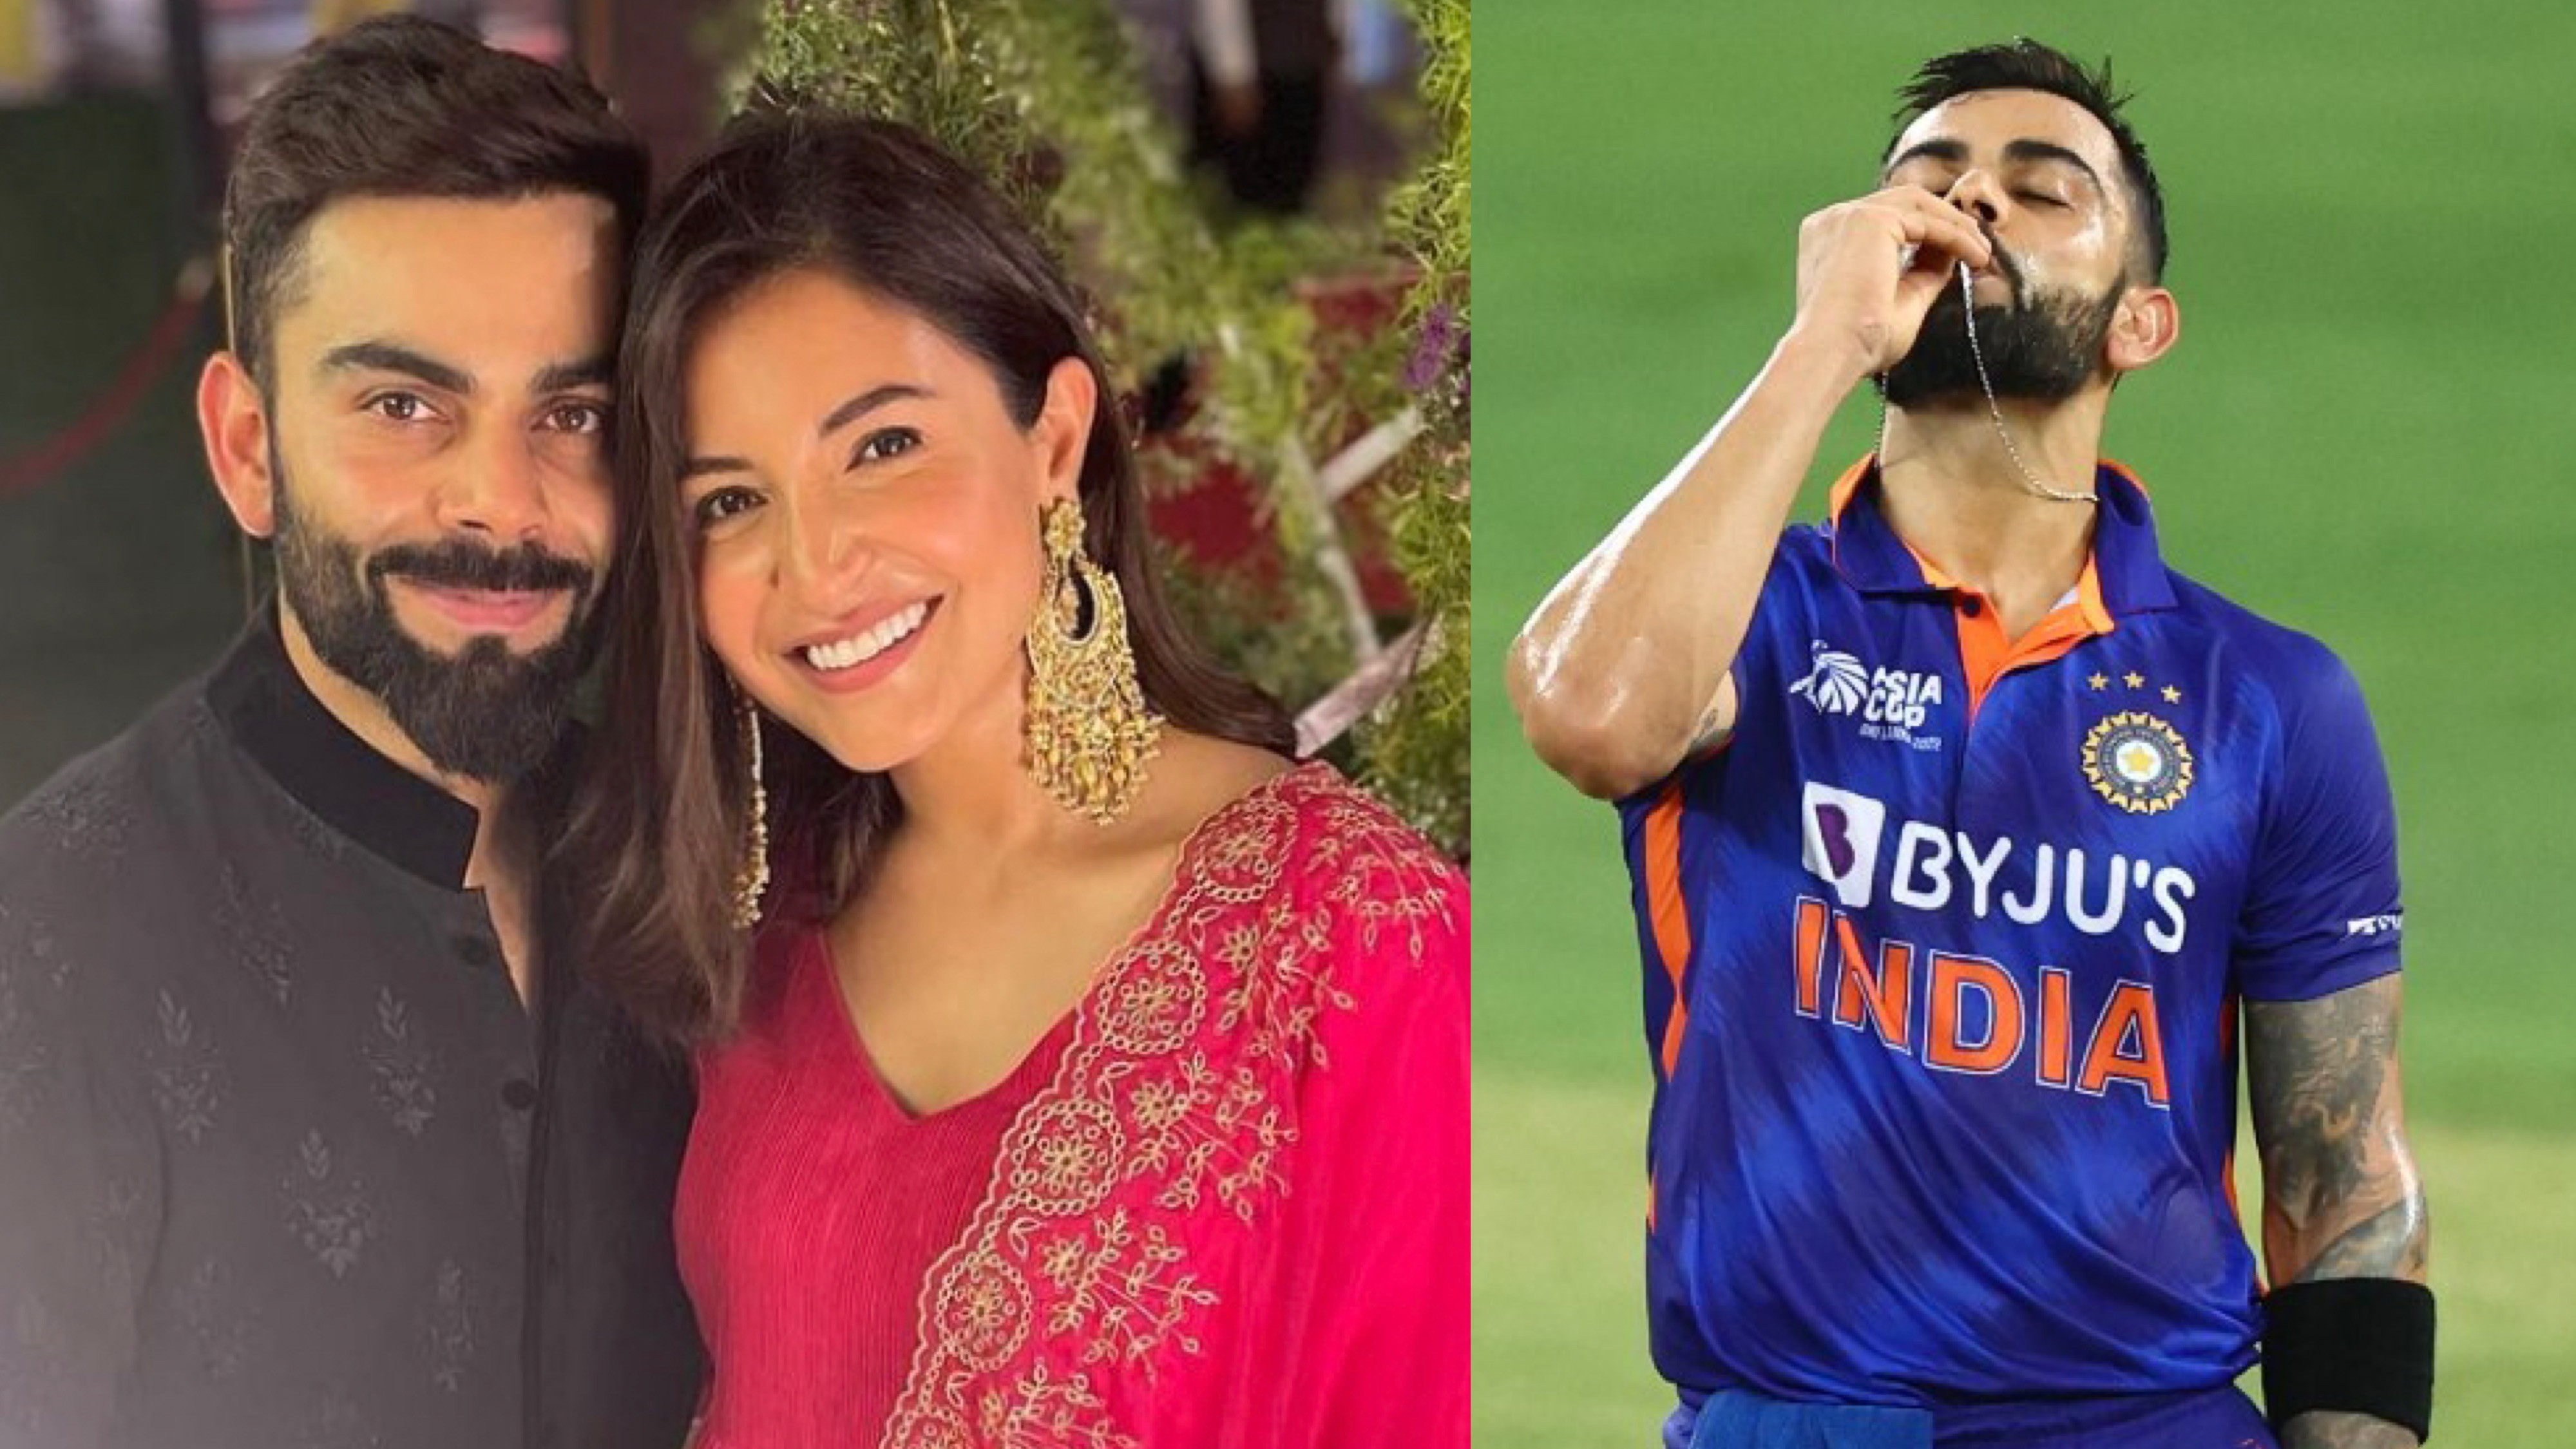 Asia Cup 2022: “Forever with you through any and everything” - Anushka Sharma after Virat Kohli's 71st ton